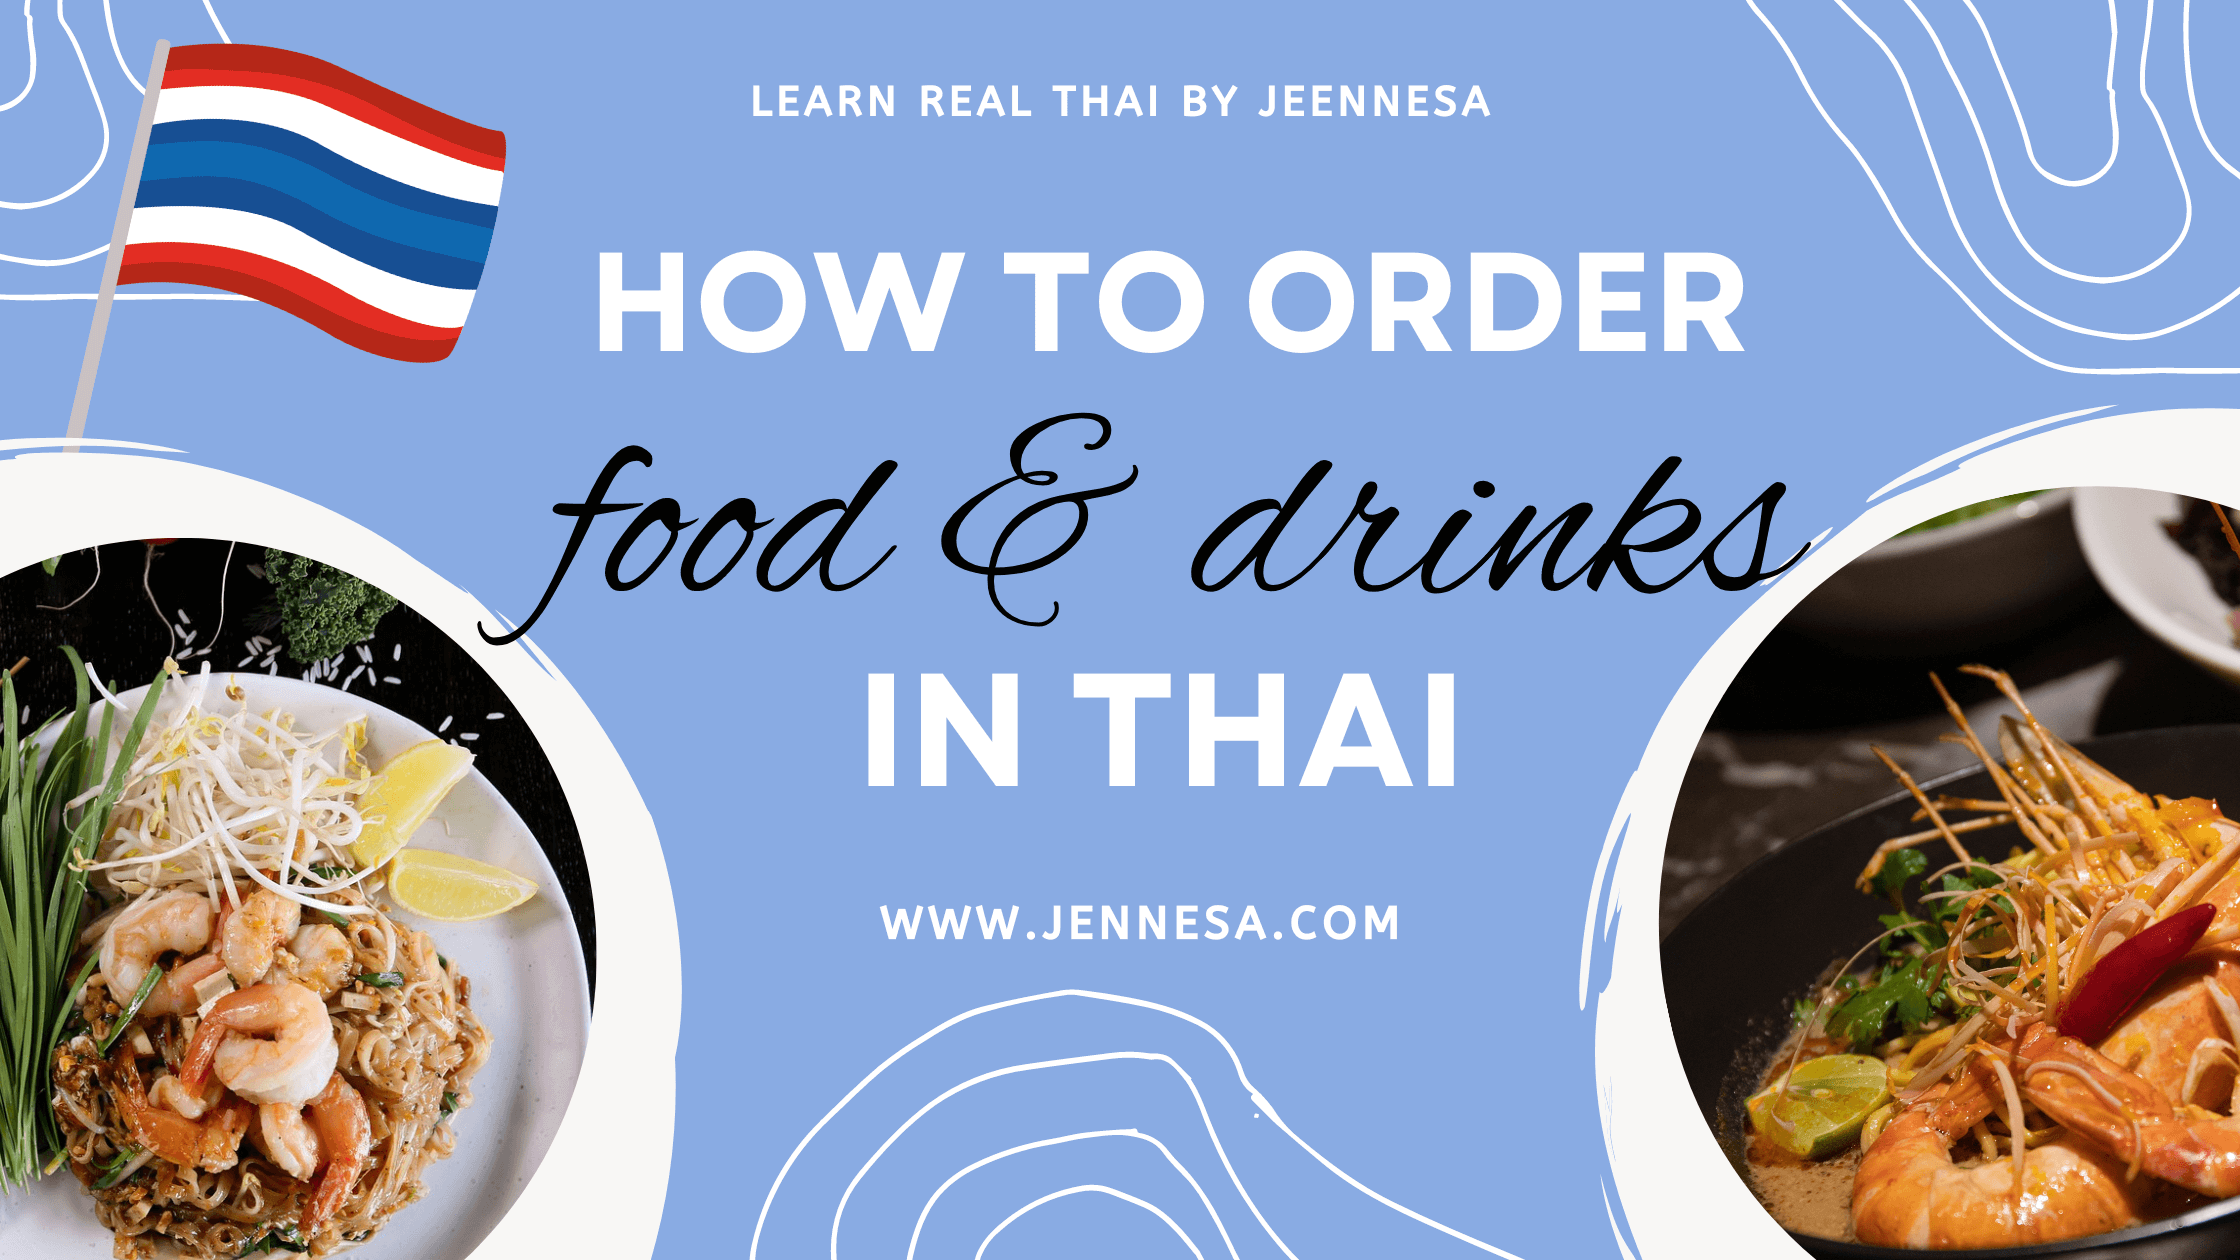 How to order food and drinks in Thai